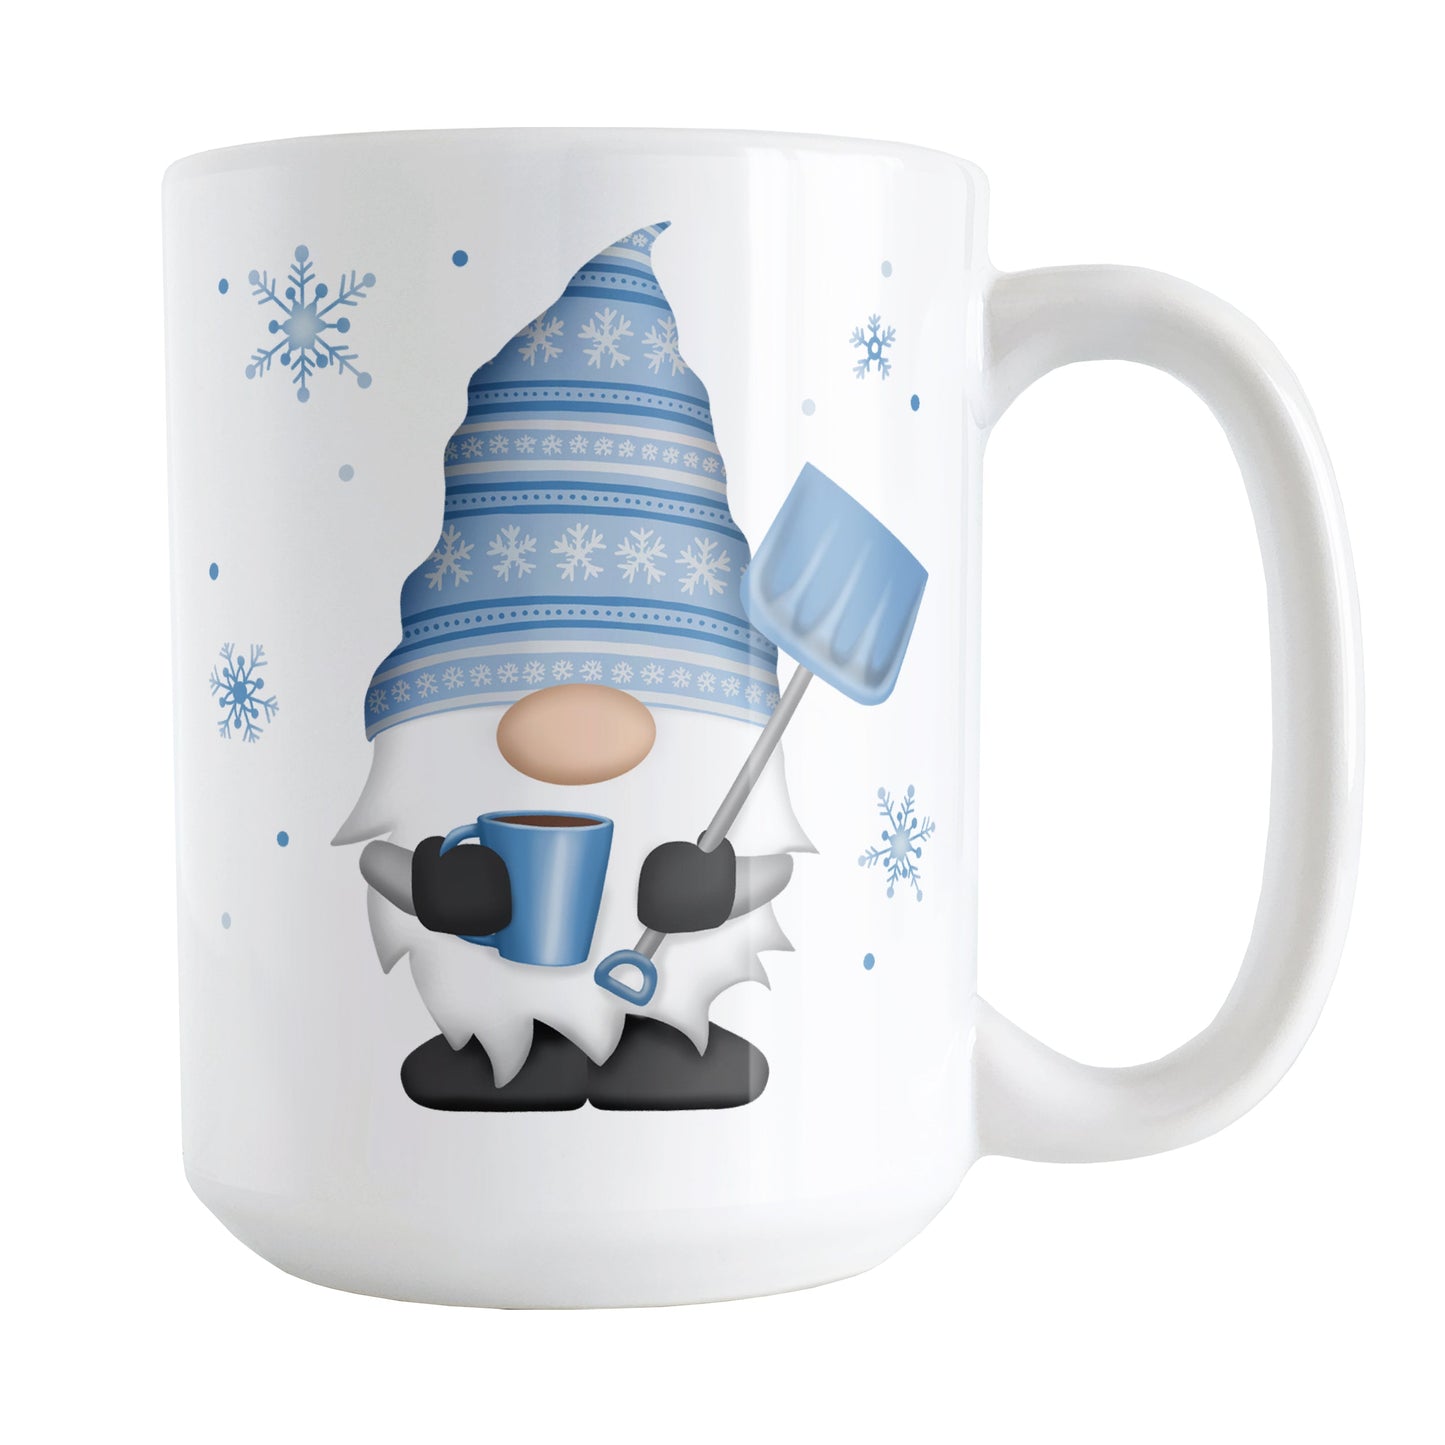 Winter Snowflake Gnome Mug (15oz) at Amy's Coffee Mugs. A ceramic coffee mug designed with a gnome with a festive blue snowflake hat and holding a hot beverage and snow shovel with snowflakes around it. This cute winter gnome illustration is on both sides of the mug. 